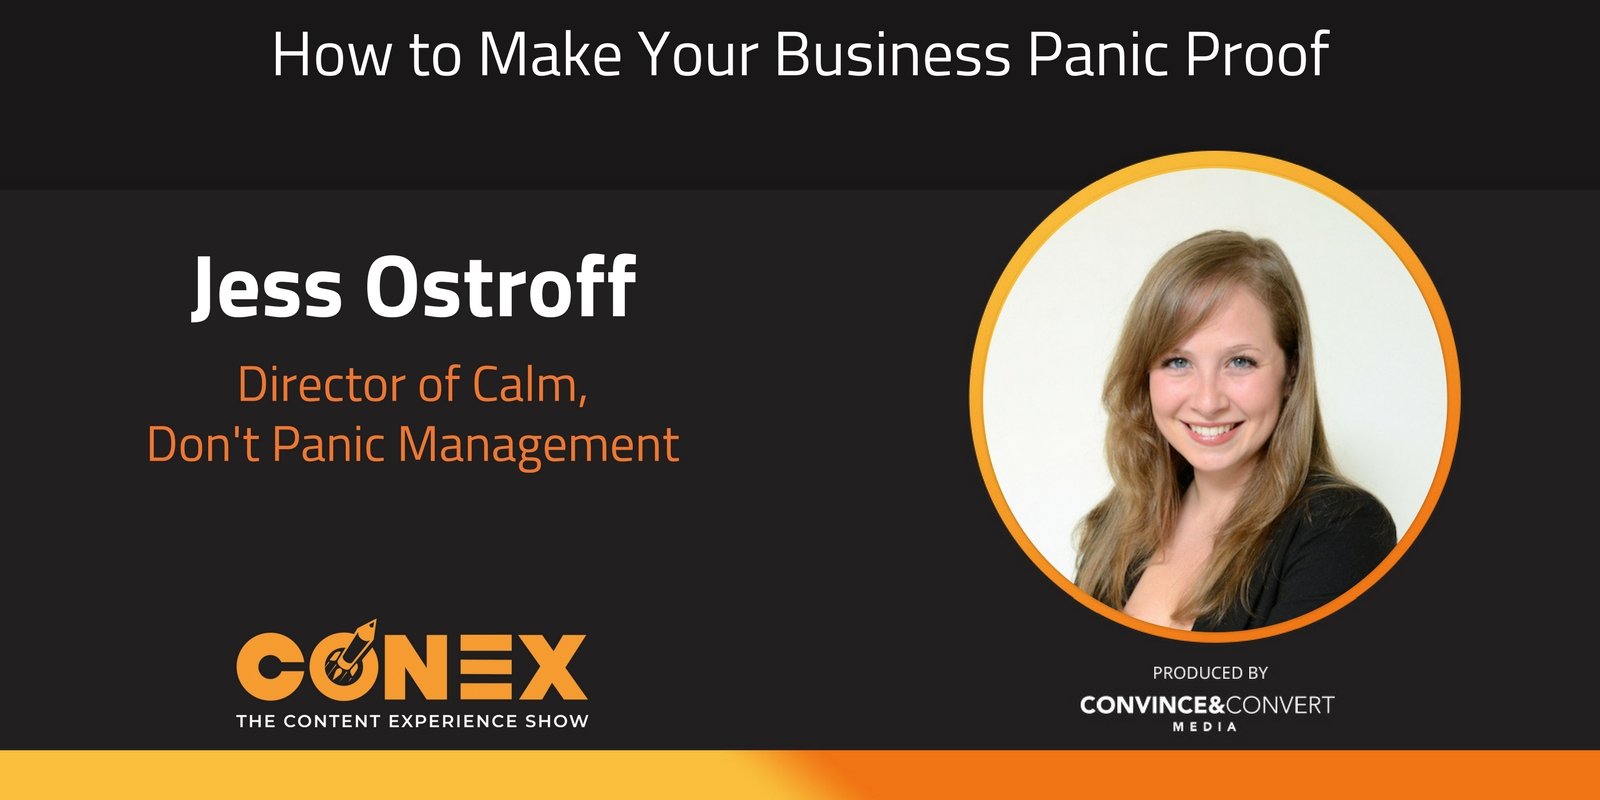 How to Make Your Business Panic Proof